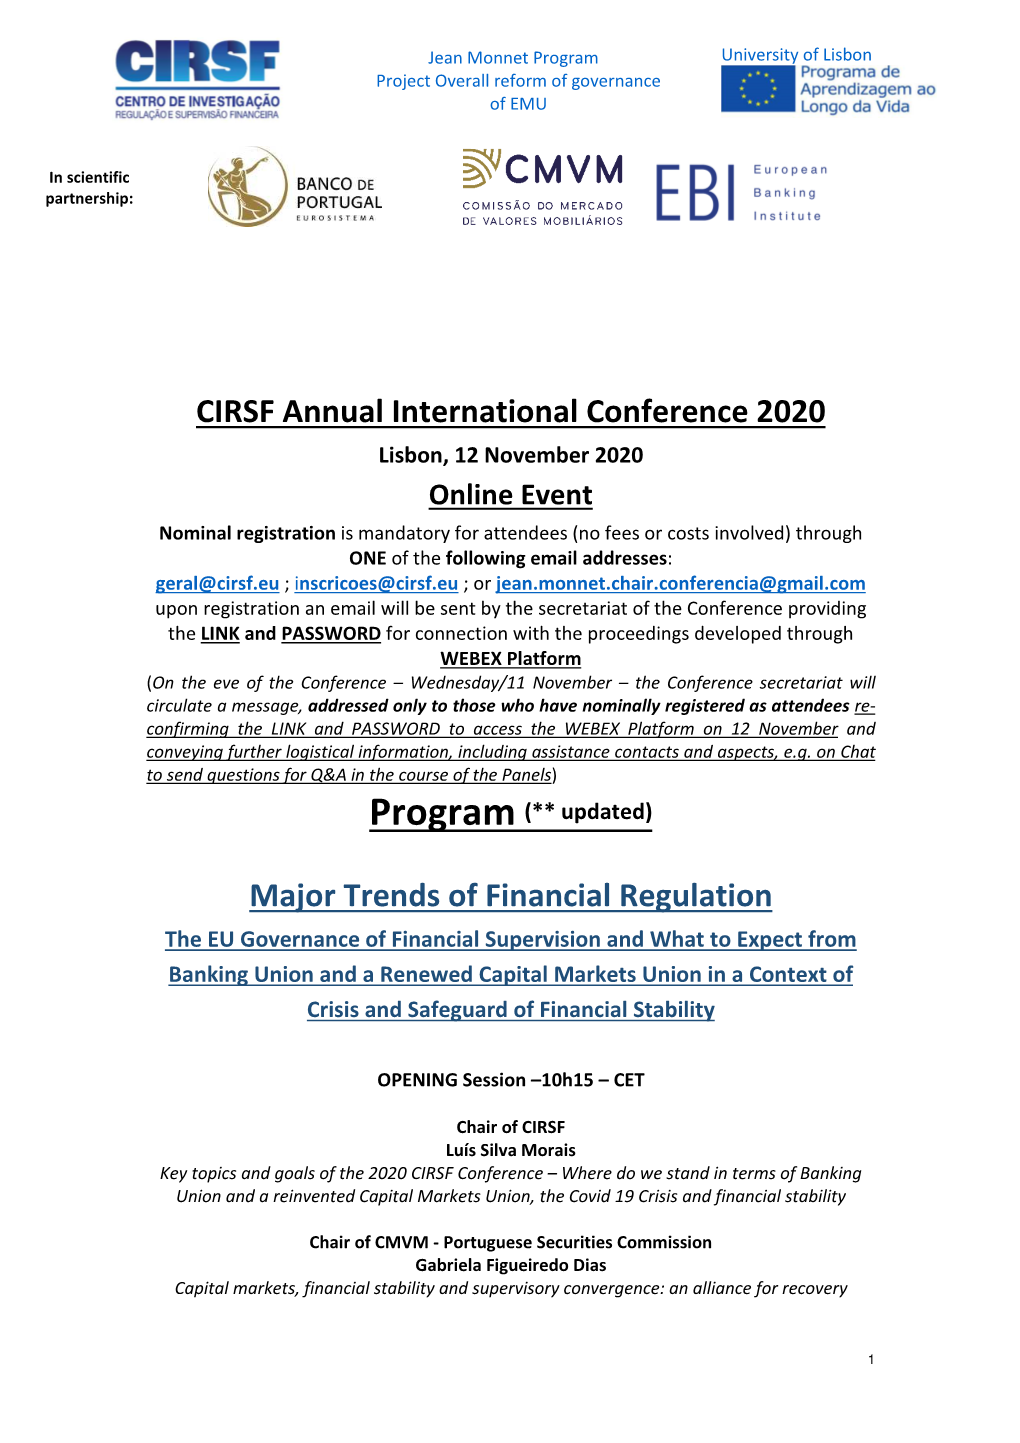 CIRSF Annual International Conference 2020 Major Trends Of